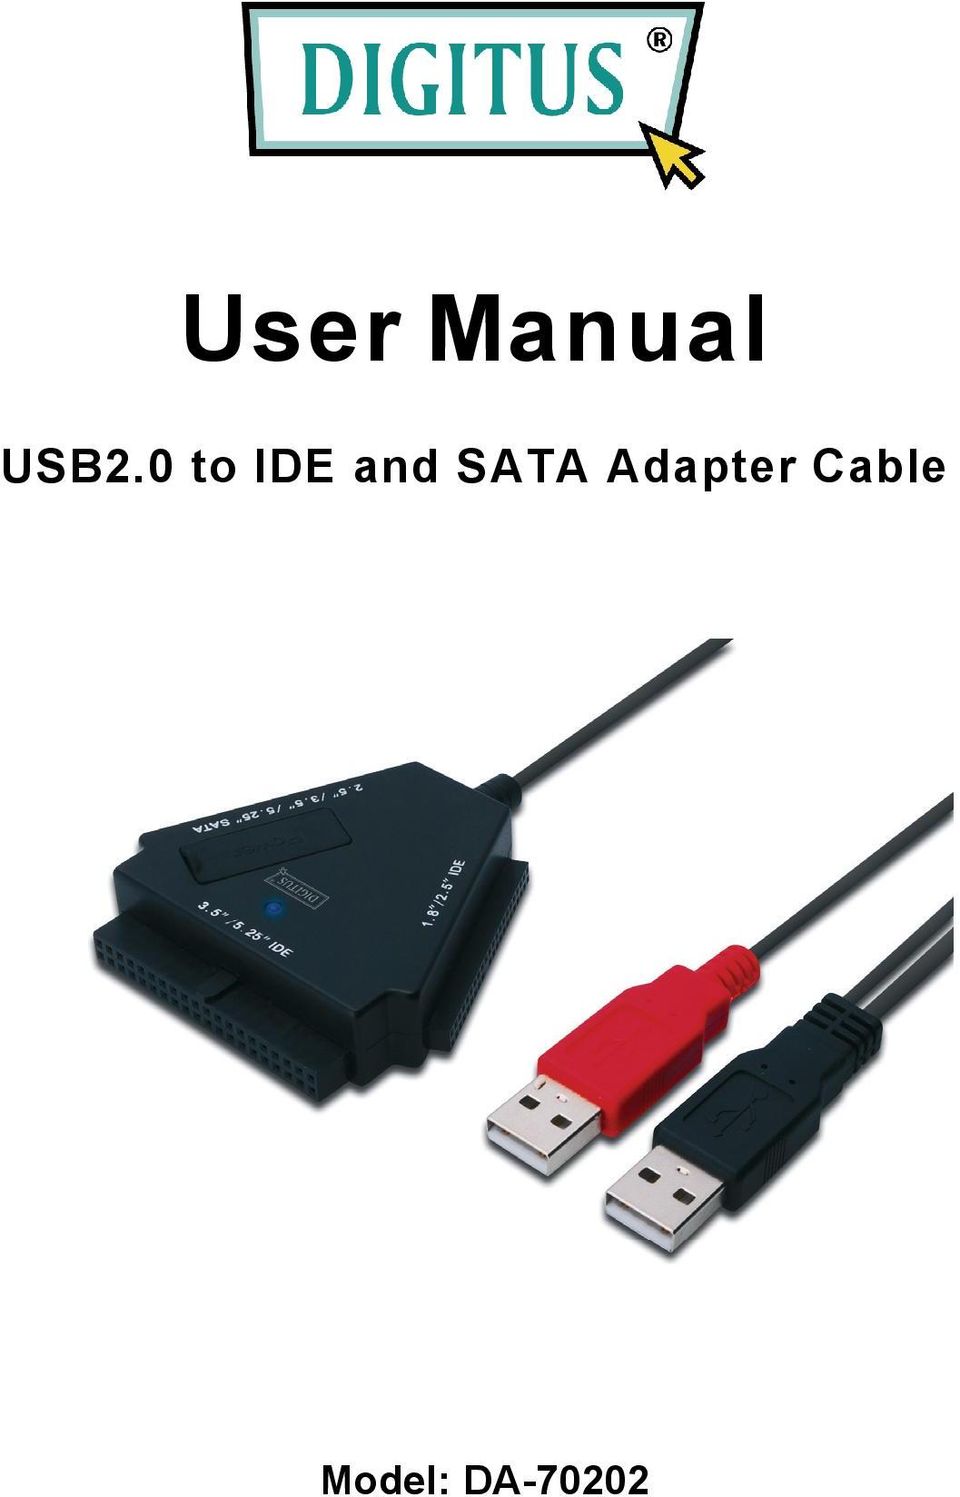 Usb2 0 to ide & sata cable user manual